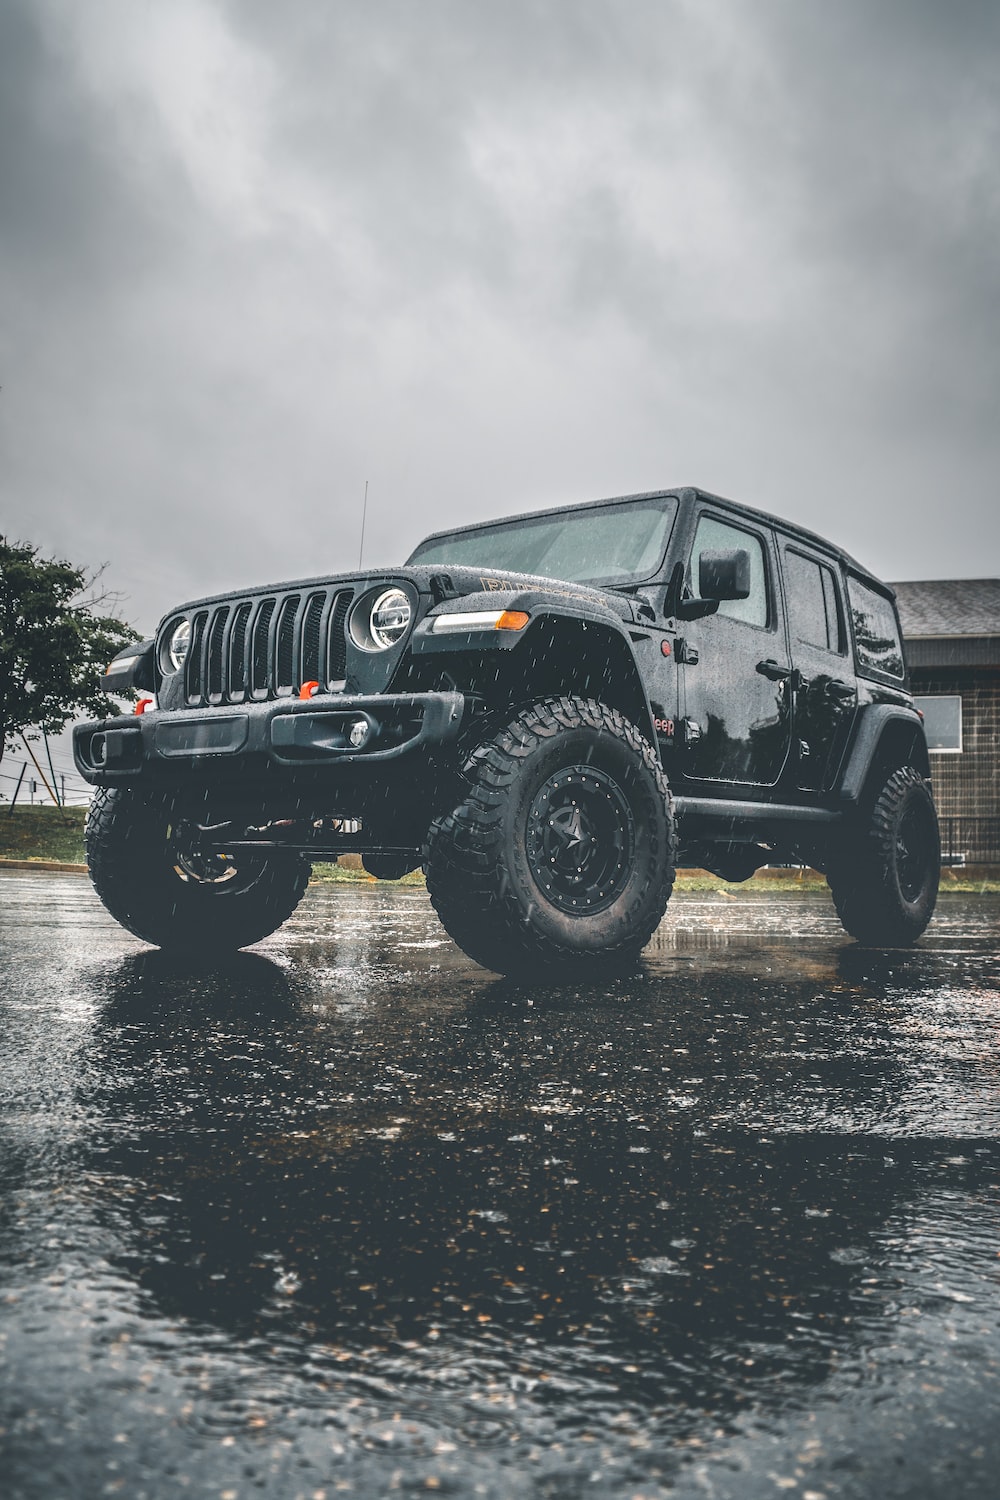 Jeep Wrangler Picture. Download Free Image